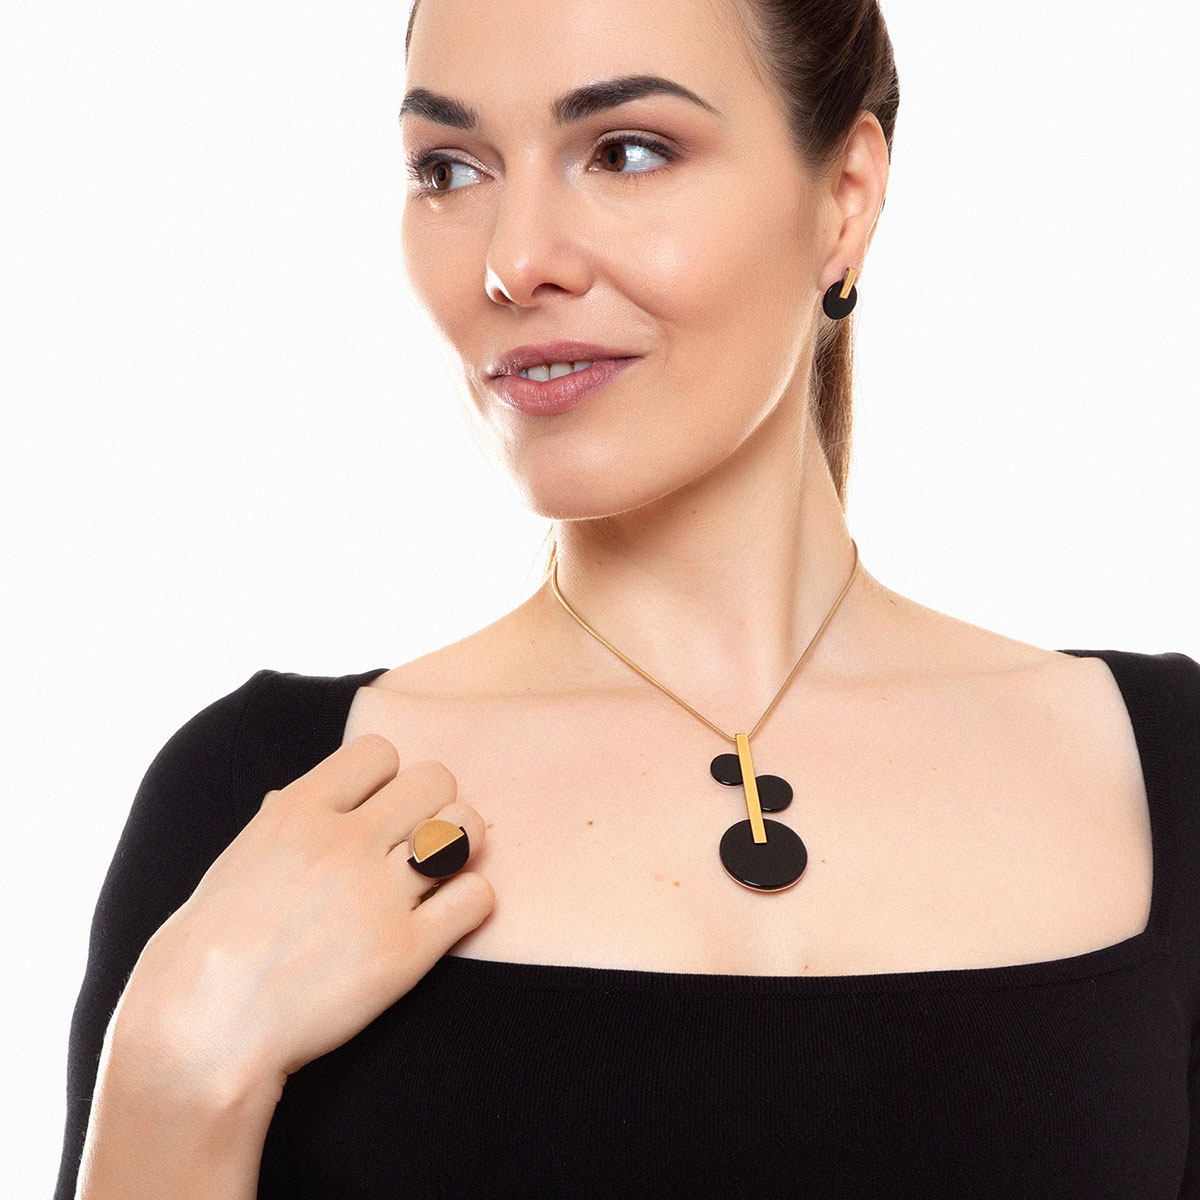 Zul handmade necklace in 9k or 18k gold, sterling silver and onyx designed by Belen Bajo m1